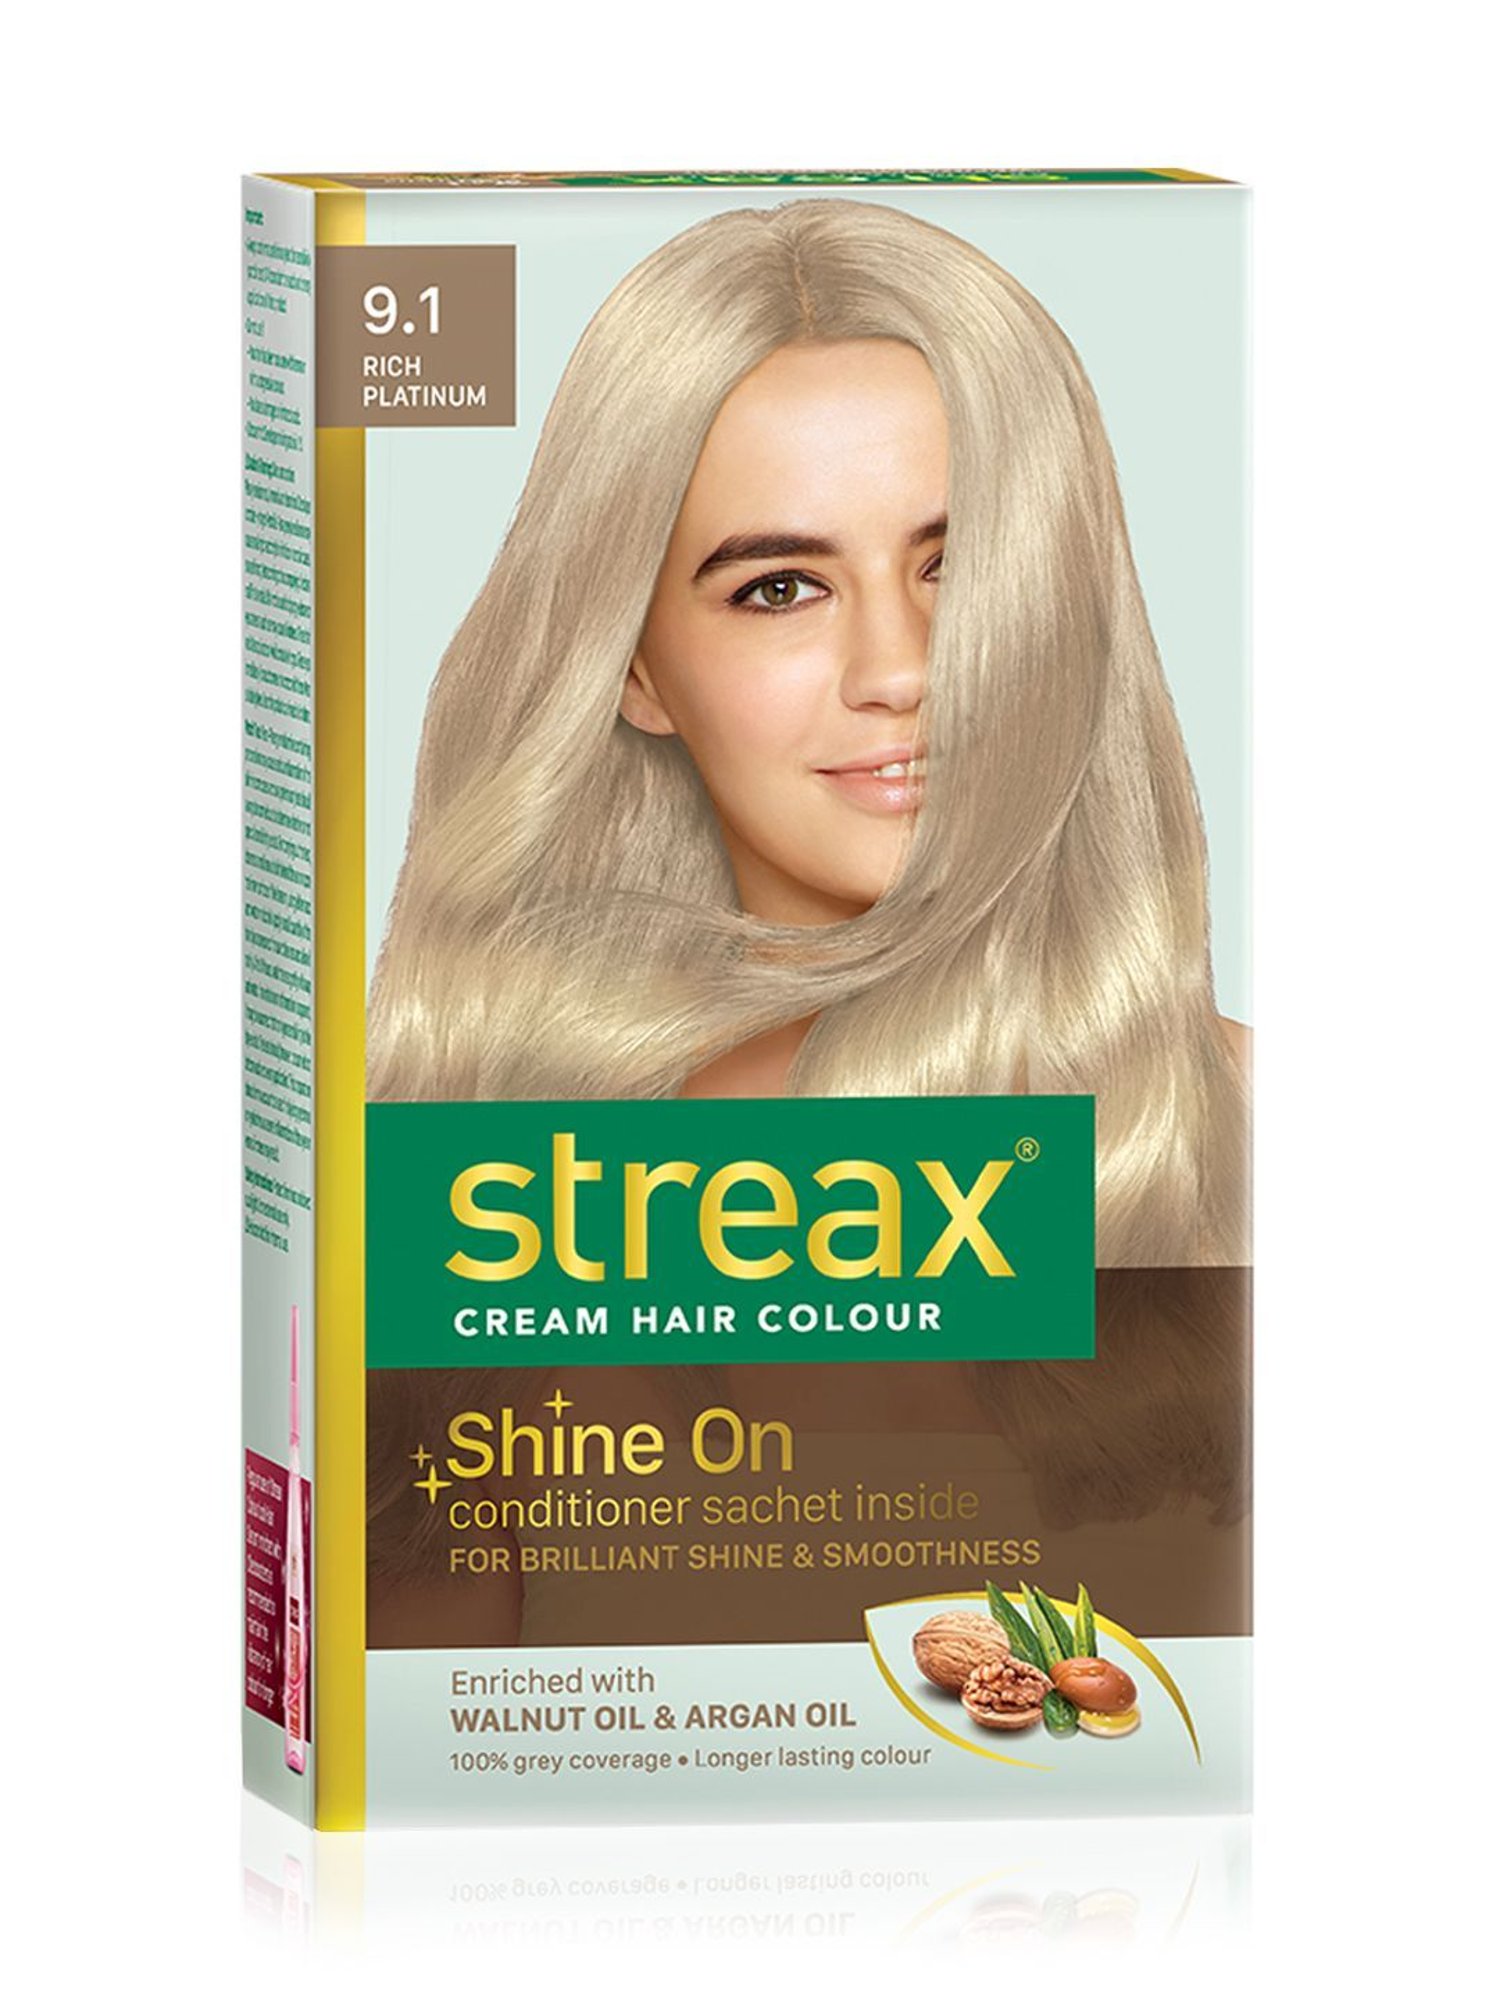 Streax Ultralights Hair Color in Style 2 Review